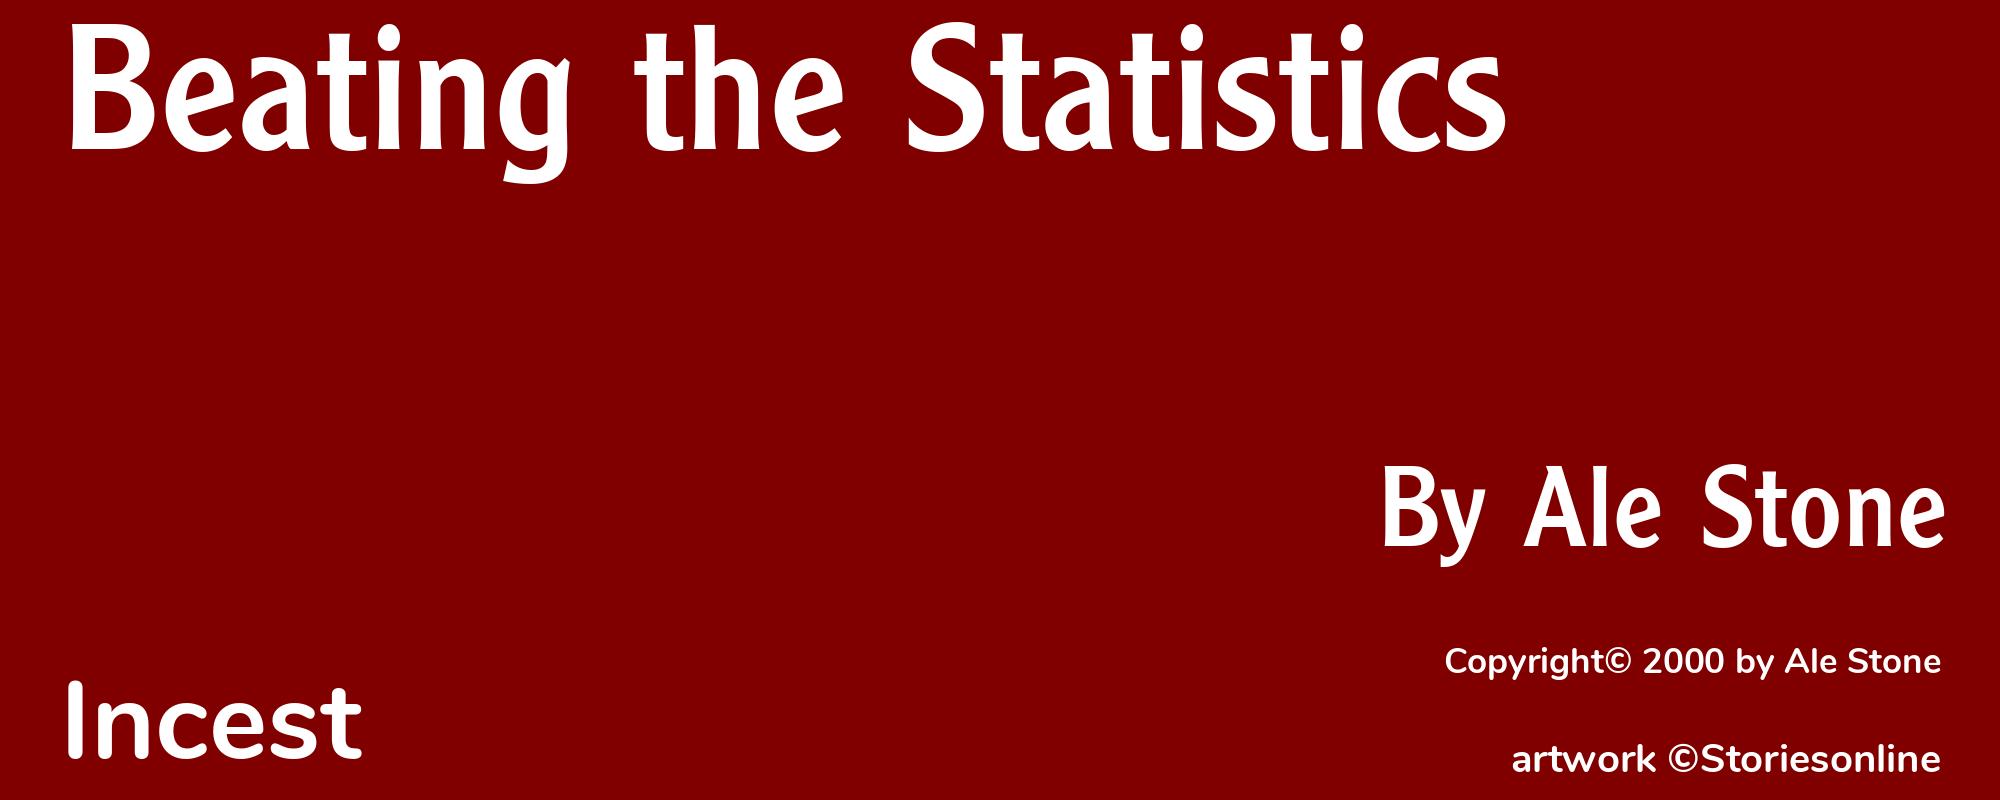 Beating the Statistics - Cover